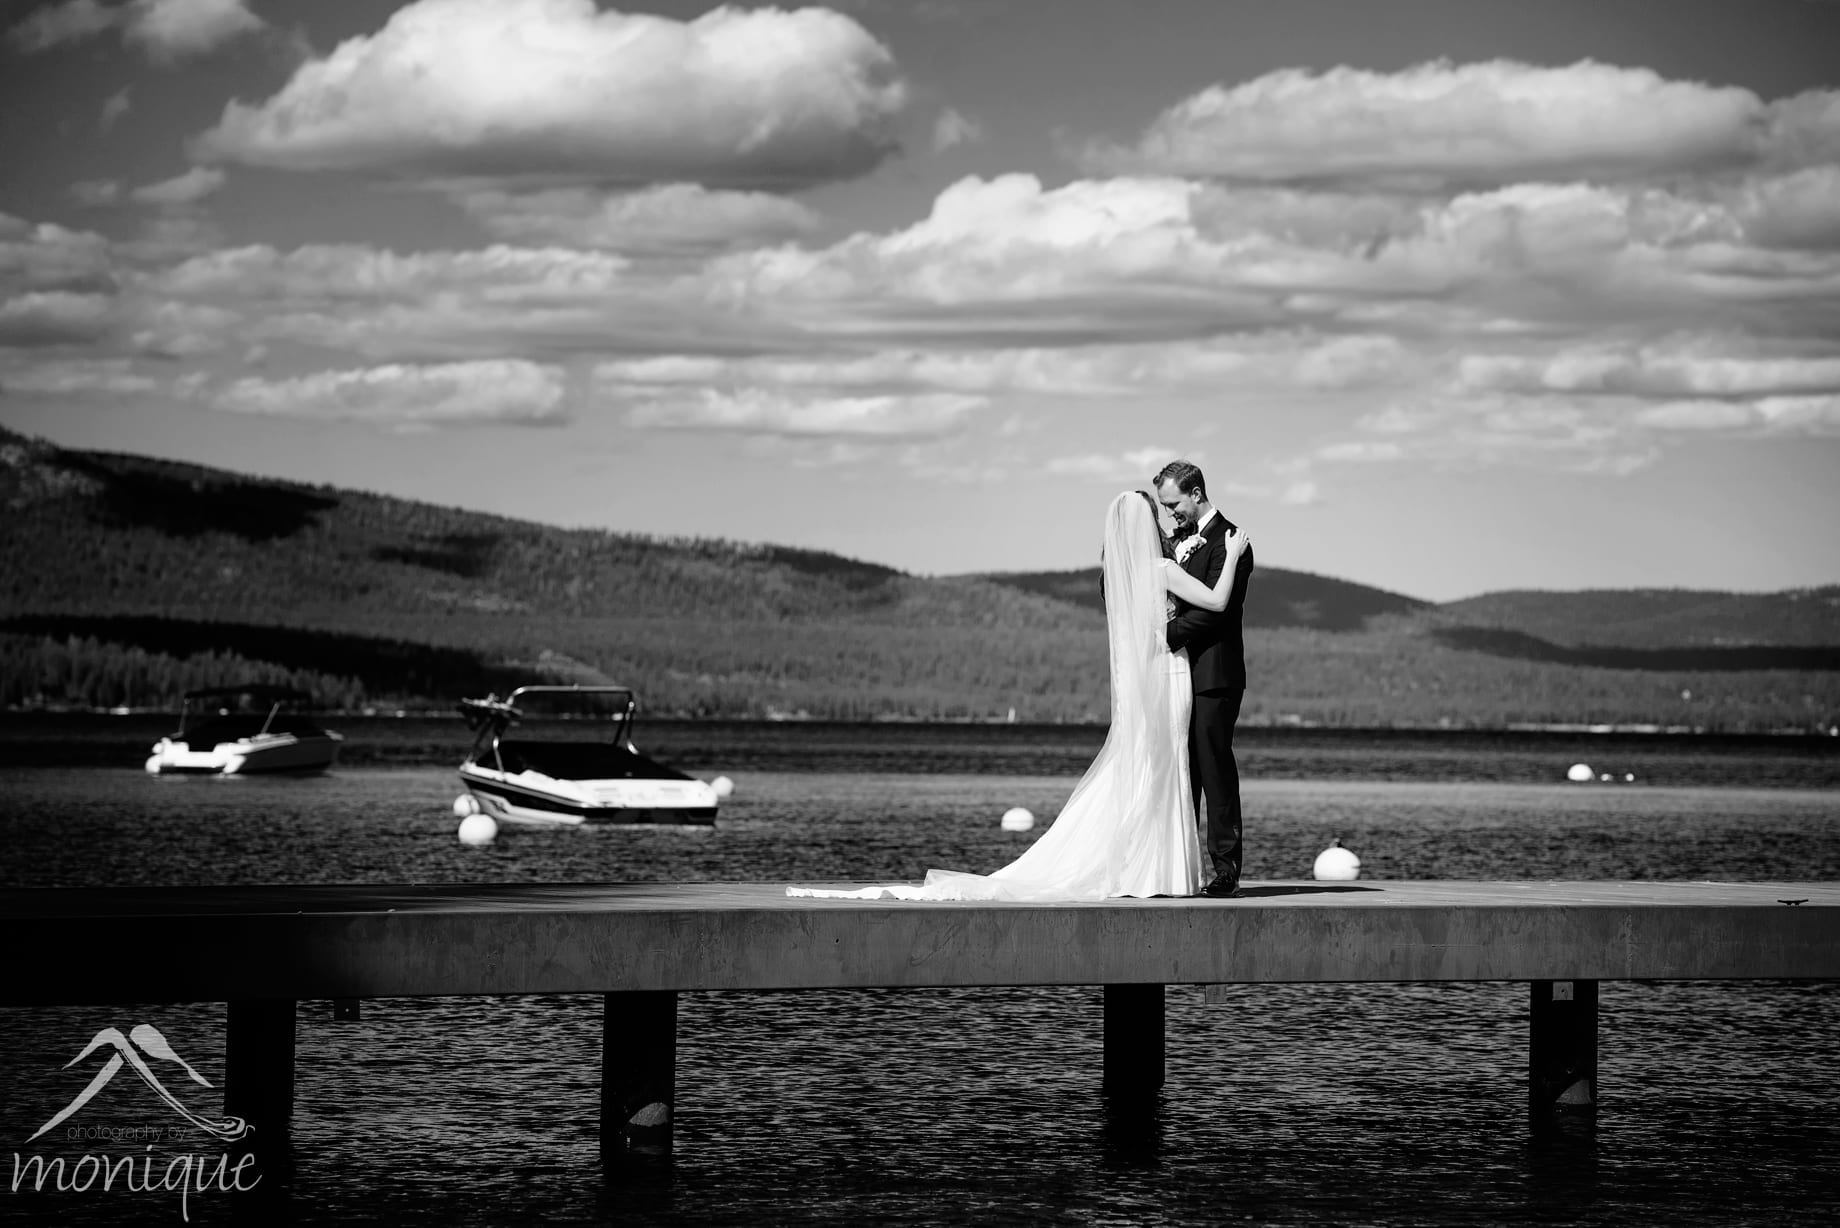 West Shore Cafe wedding photography at Lake Tahoe, Photography by Monique, documentary, portrait session on a pier